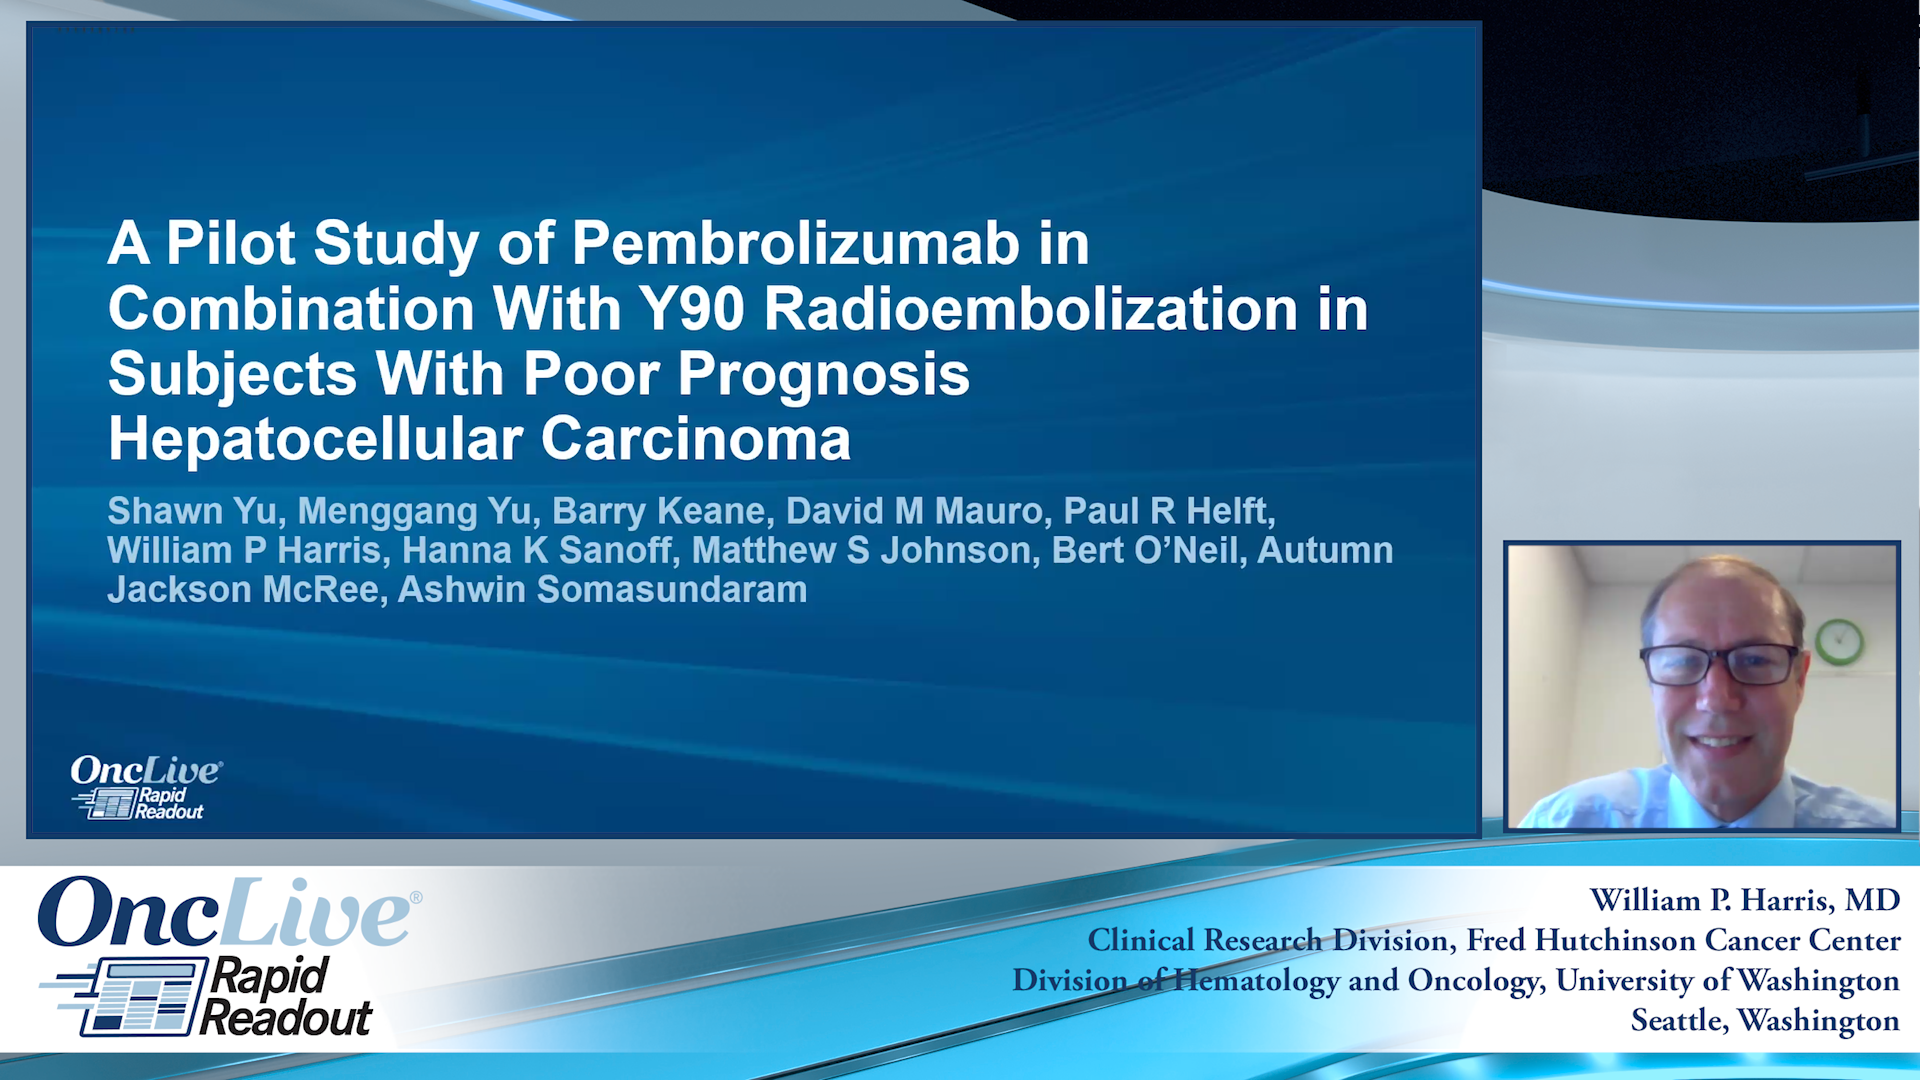 A Pilot Study of Pembrolizumab in Combination With Y90 Radioembolization in Subjects With Poor Prognosis Hepatocellular Carcinoma